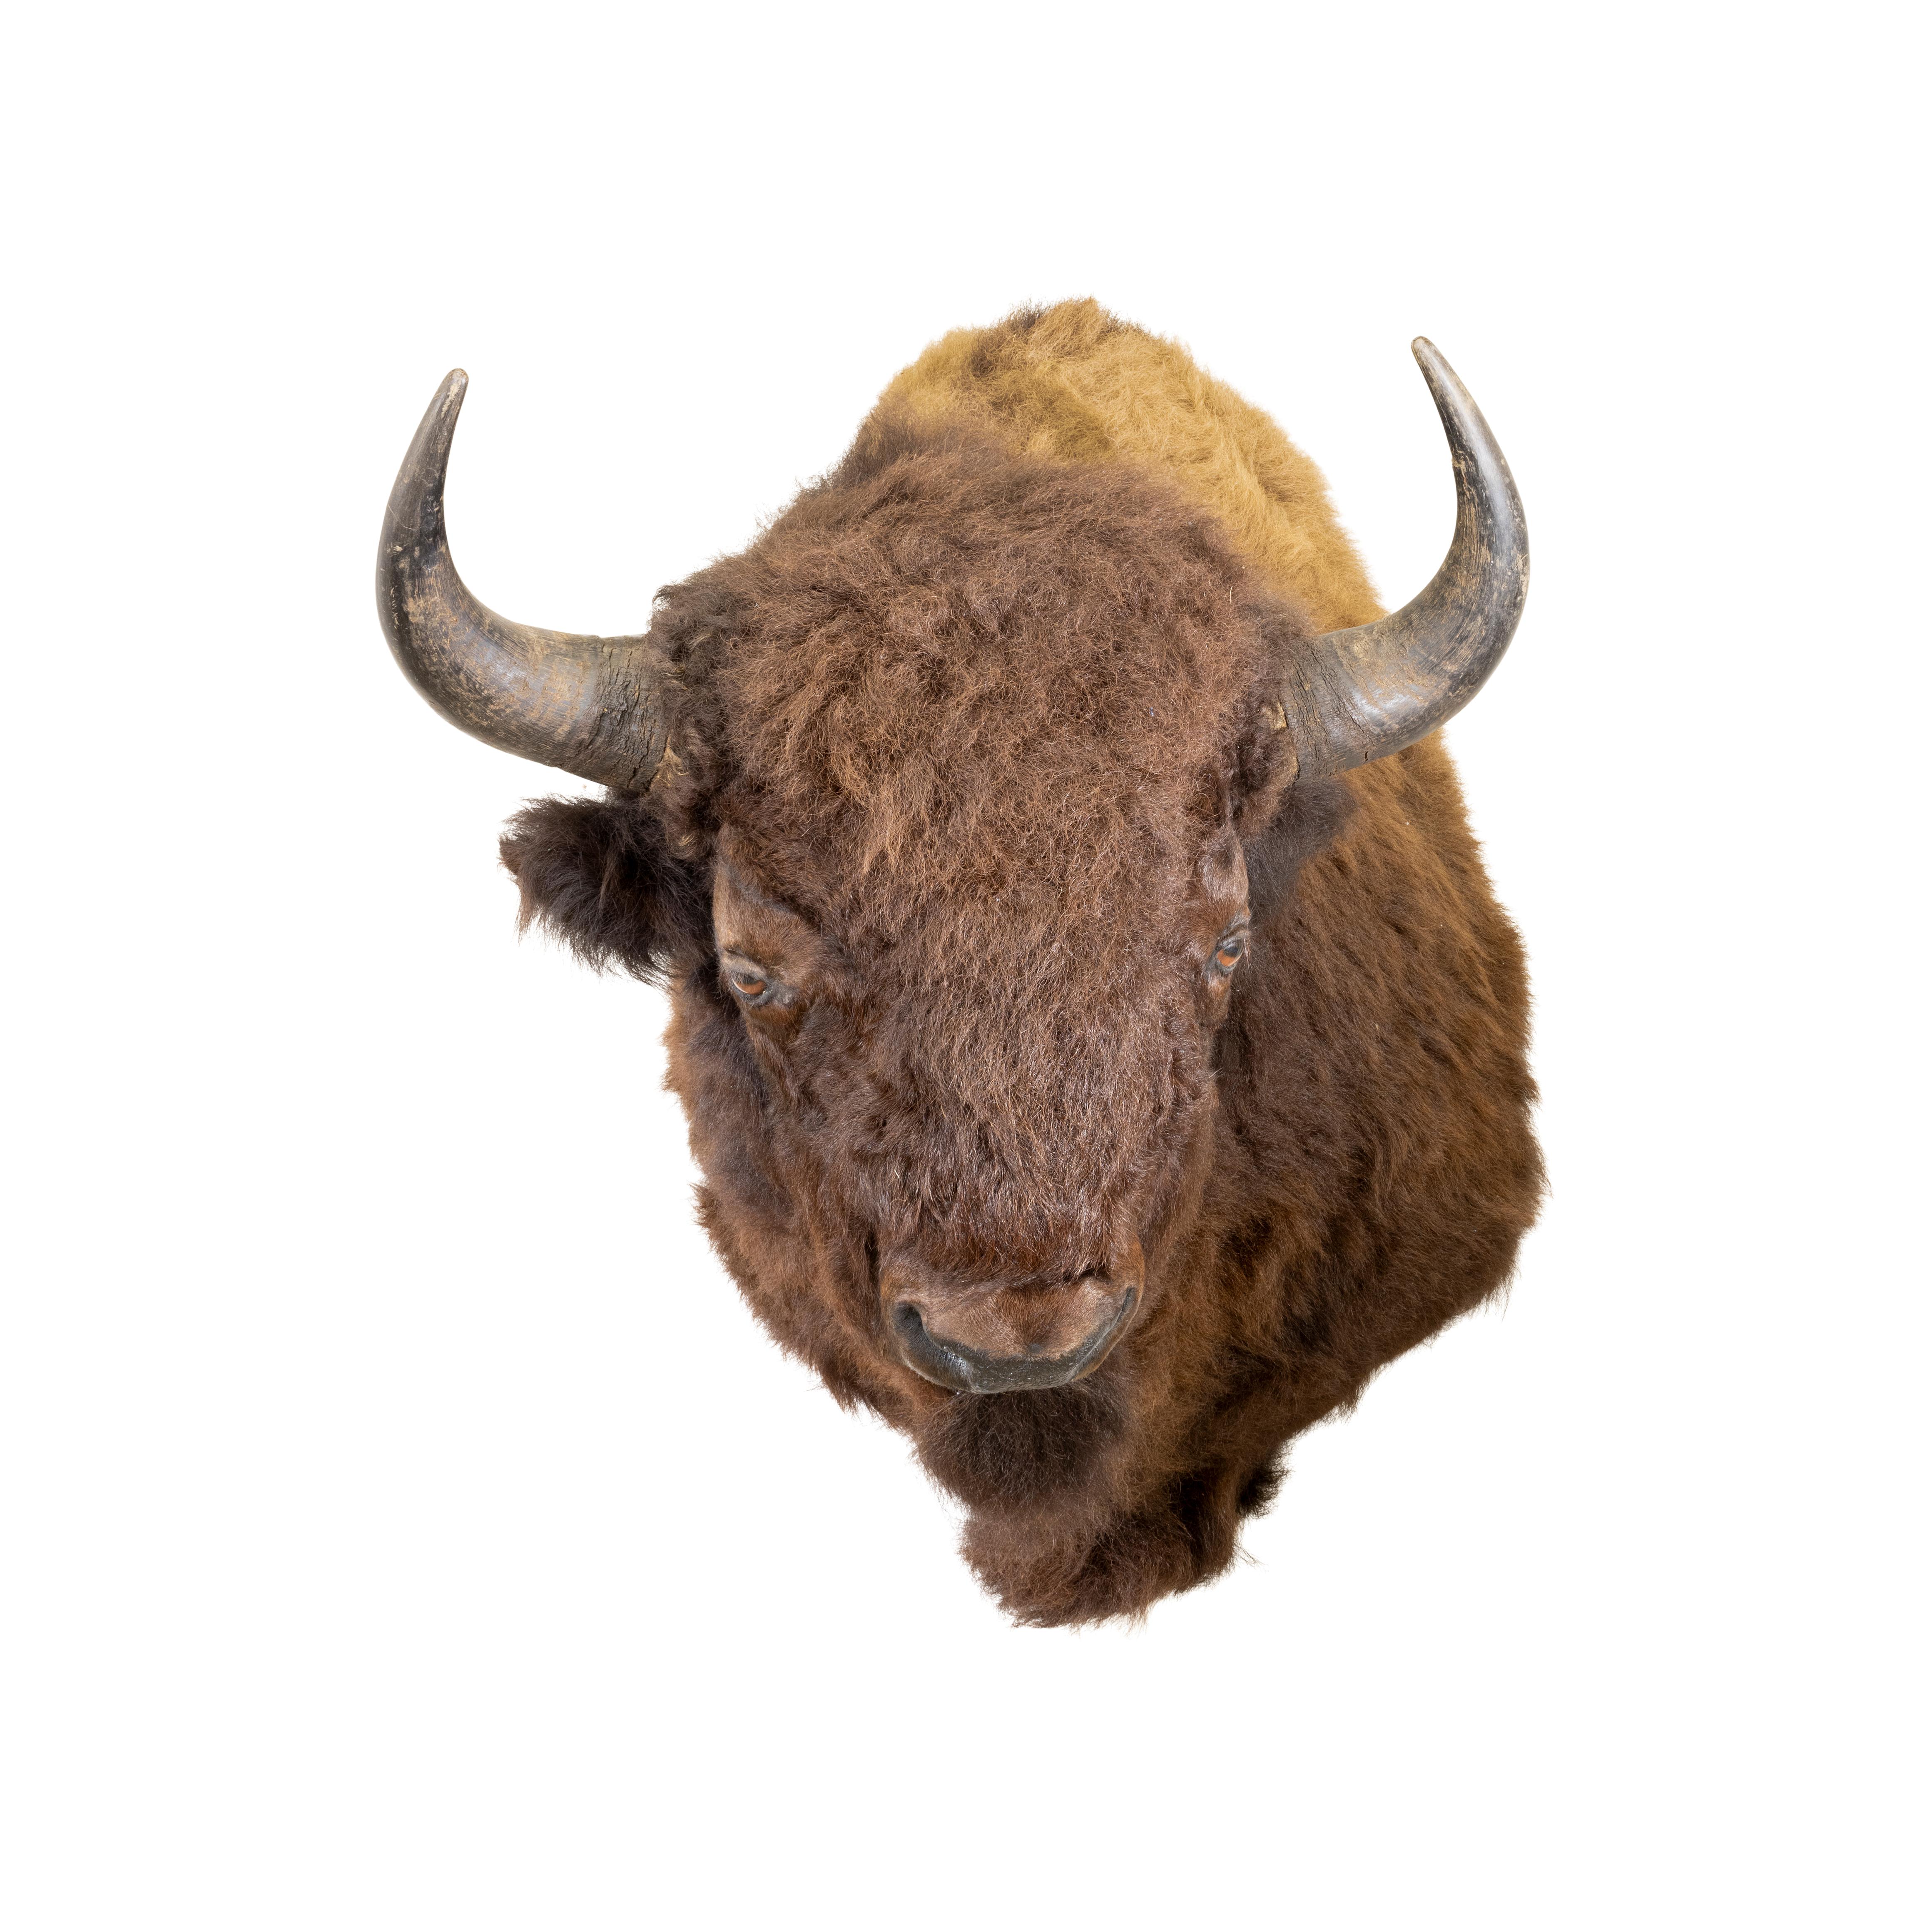 Montana buffalo bison taxidermy mount. This lovely contemporary shoulder mount features two toned fur in light tan and chocolate brown colors. Horns are large and in good condition. Taxidermy is realistic and well done. Hangs securely to the wall.